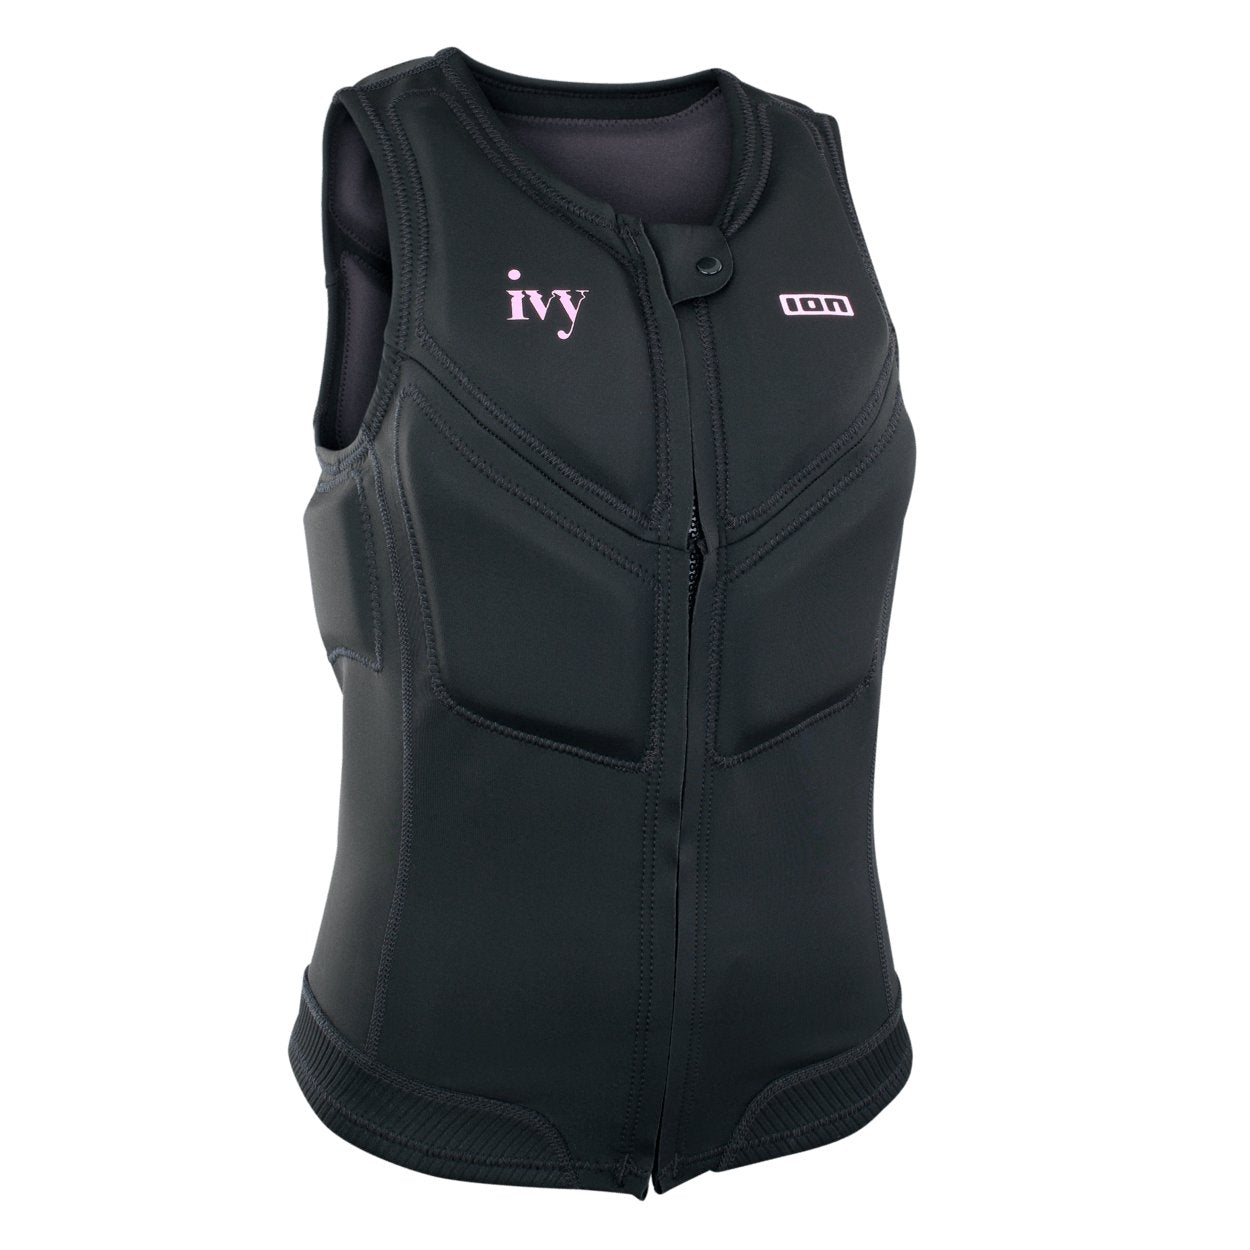 ION Ivy Vest Front Zip 2023 - Worthing Watersports - 9010583015644 - Protection - ION Water